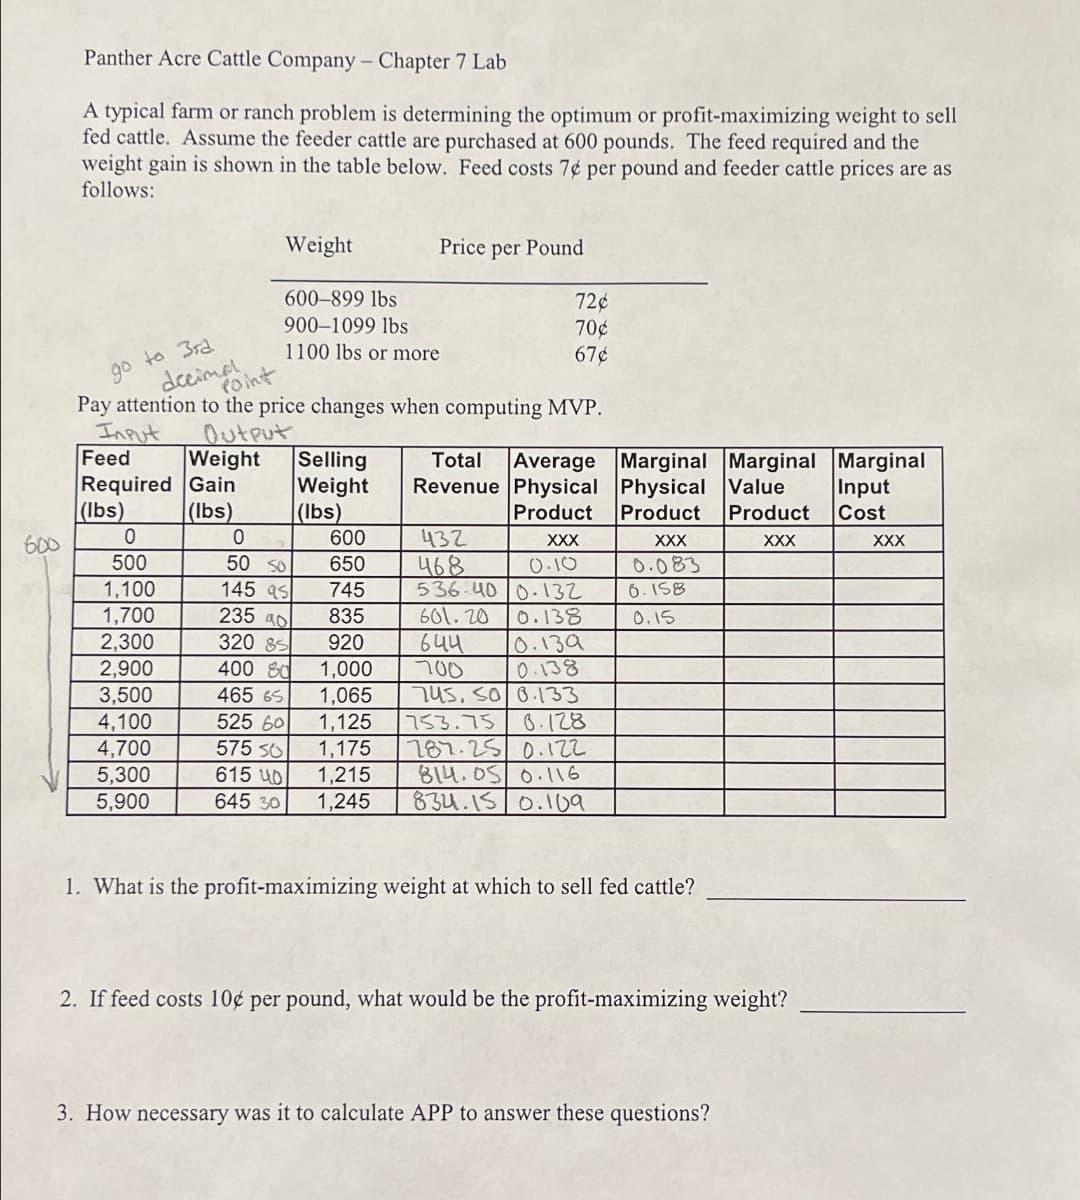 Panther Acre Cattle Company - Chapter 7 Lab
A typical farm or ranch problem is determining the optimum or profit-maximizing weight to sell
fed cattle. Assume the feeder cattle are purchased at 600 pounds. The feed required and the
weight gain is shown in the table below. Feed costs 7¢ per pound and feeder cattle prices are as
follows:
Weight
Price per Pound
600-899 lbs
72¢
go to 3rd
900-1099 lbs
decimal
1100 lbs or more
70¢
Point
67¢
Pay attention to the price changes when computing MVP.
Input
Output
Feed
Weight
Selling
Required Gain
Weight
Total Average Marginal Marginal Marginal
Revenue Physical Physical Value
Input
(lbs)
(lbs)
(lbs)
Product
Product
Product
Cost
600
0
0
600
432
XXX
XXX
XXX
XXX
500
50 So
650
468
0.10
0.083
1,100
145 as
745
536.40 0.132
6.158
1,700
235 aol
835
601.20
0.138
0.15
2,300
320 85
920
644
0.139
2,900
400 80
1,000
700
0.138
3,500
465 65
1,065
745, 50 0.133
4,100
525 60
1,125
753.75 0.128
4,700
575 SO
1,175
787.25 0.122
5,300
615 40
1,215
814.05 0.116
5,900
645 30
1,245
834.15 0.109
1. What is the profit-maximizing weight at which to sell fed cattle?
2. If feed costs 10¢ per pound, what would be the profit-maximizing weight?
3. How necessary was it to calculate APP to answer these questions?